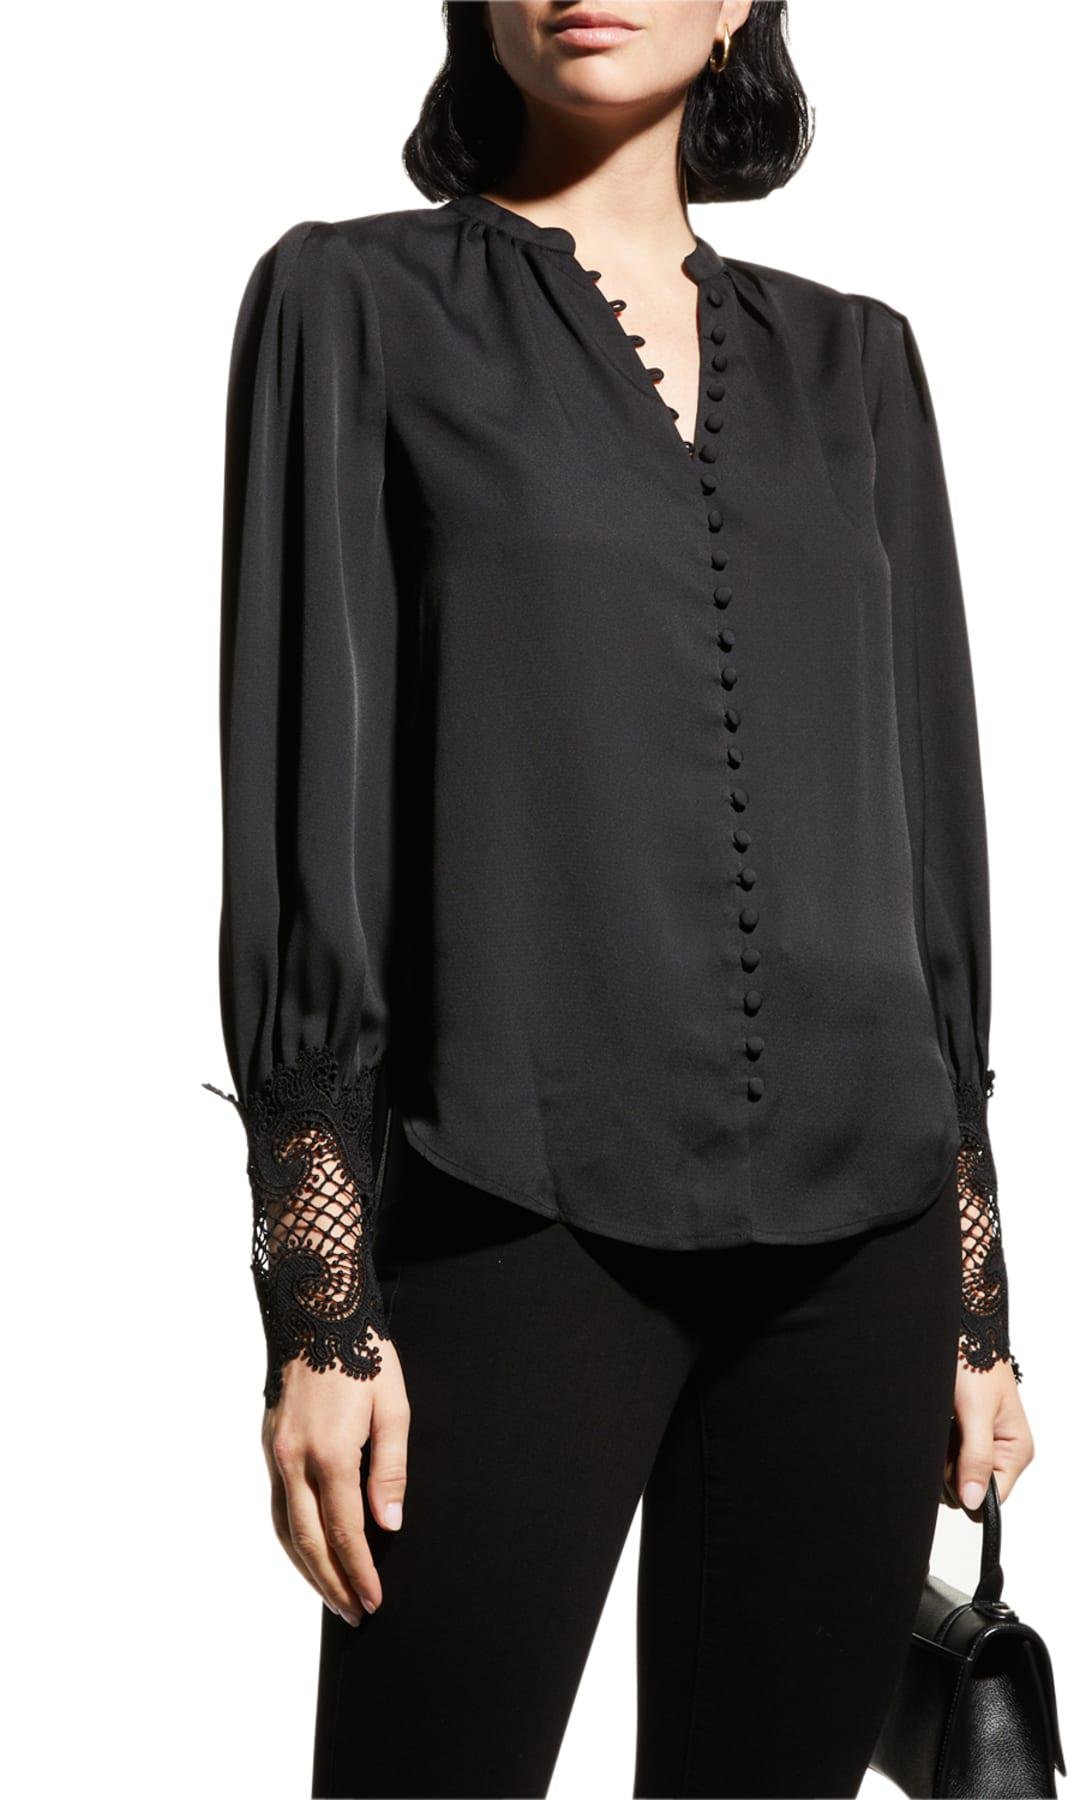 Ava Lace-Cuff Blouse by L'AGENCE